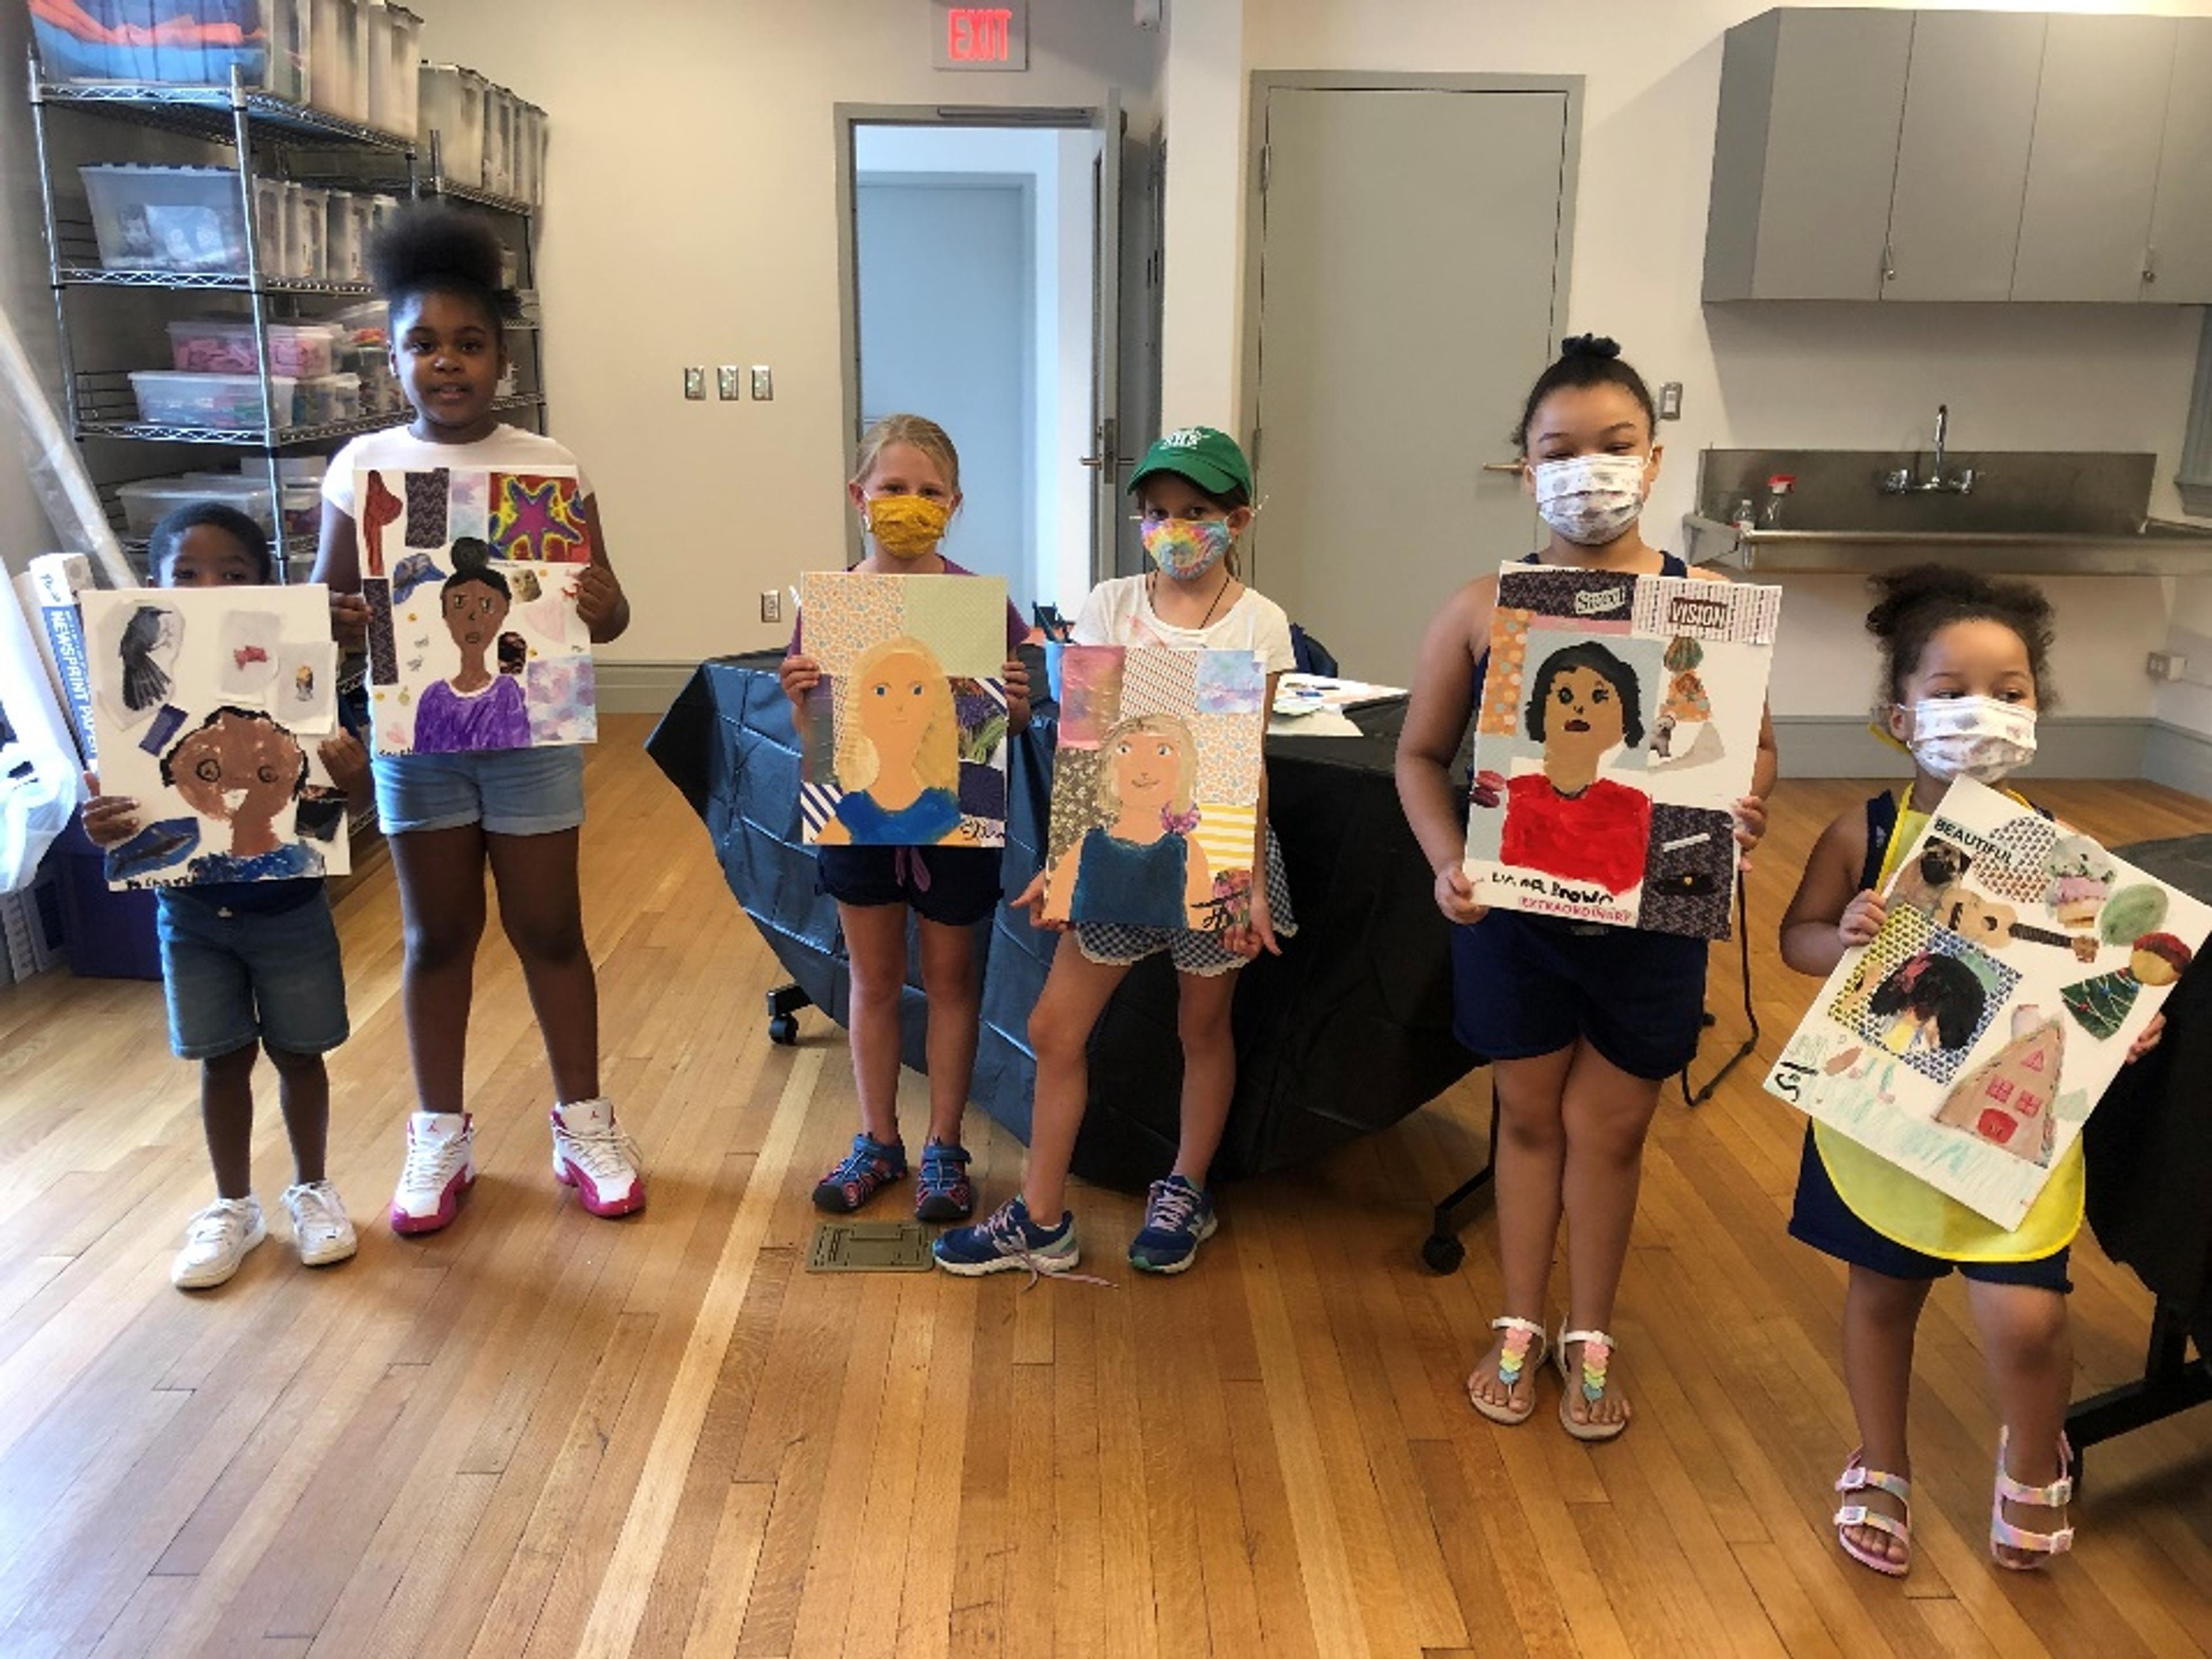 Participants display their self-portraits as part of the Exploring the Self workshops. Courtesy of the Mattatuck Museum, 2021.